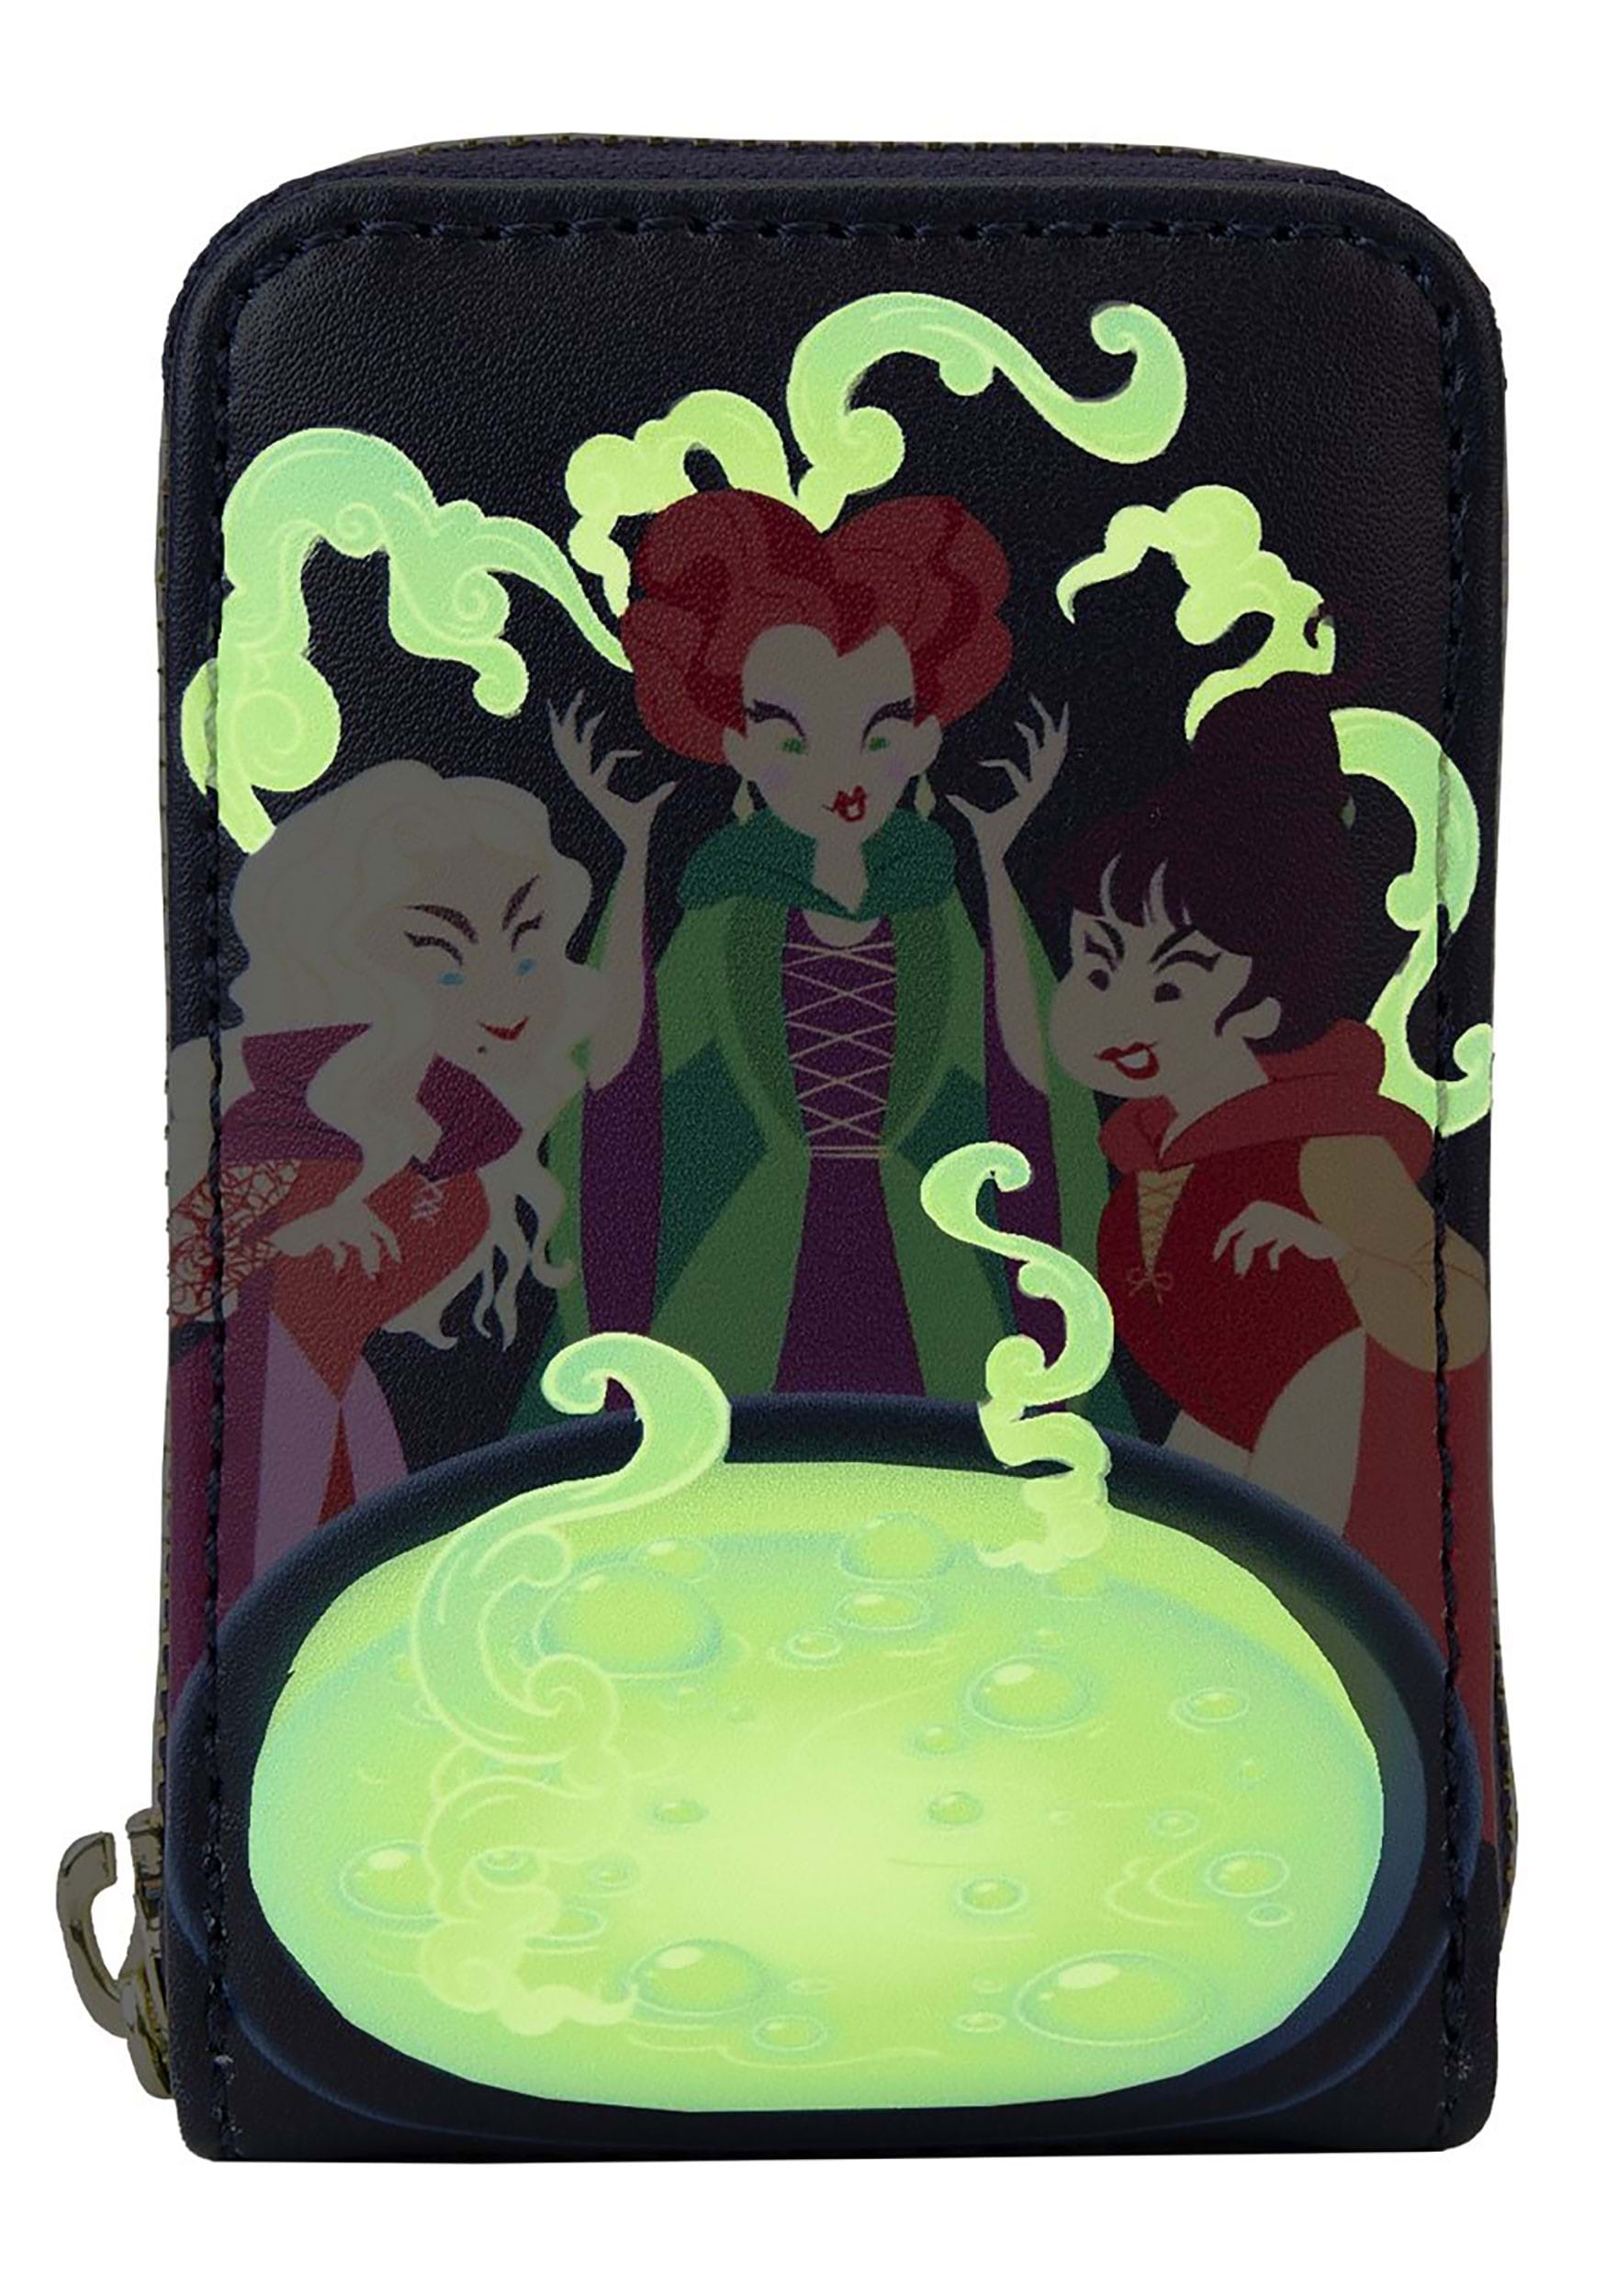 The Loungefly x Maleficent Wallet Is A Wickedly Beautiful